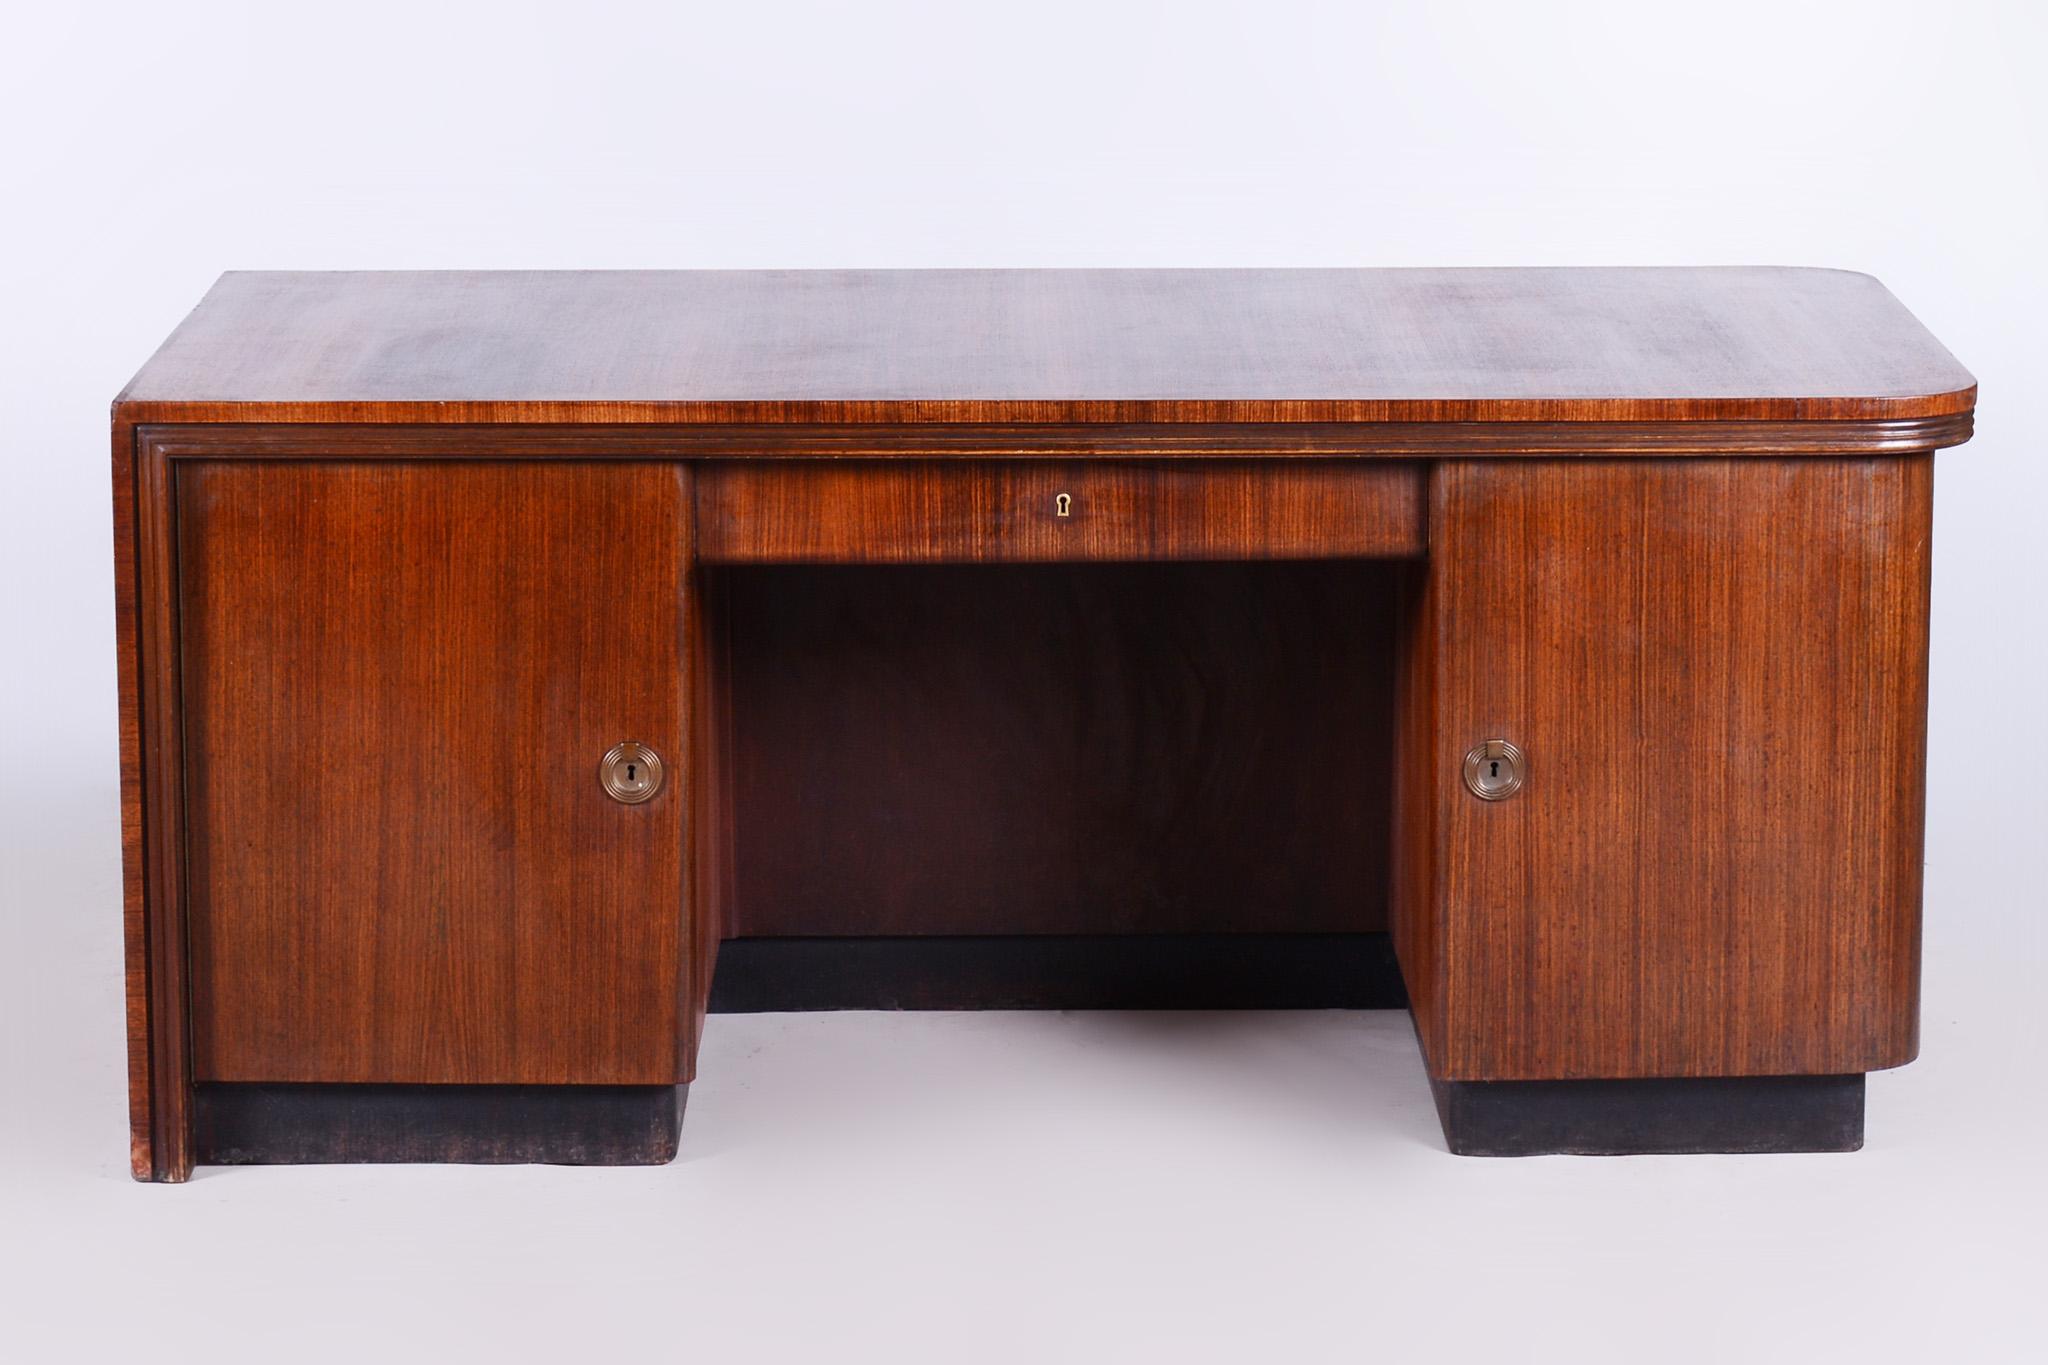 Restored Art Deco writing desk, Germany, 1930s

Revived Polish
Material: Palisandr

Measures: Leg space:
Height: 59 cm (23.2 in)
Width: 70.5 cm (27-8 in)
Depth: 57 cm (22.4 in).